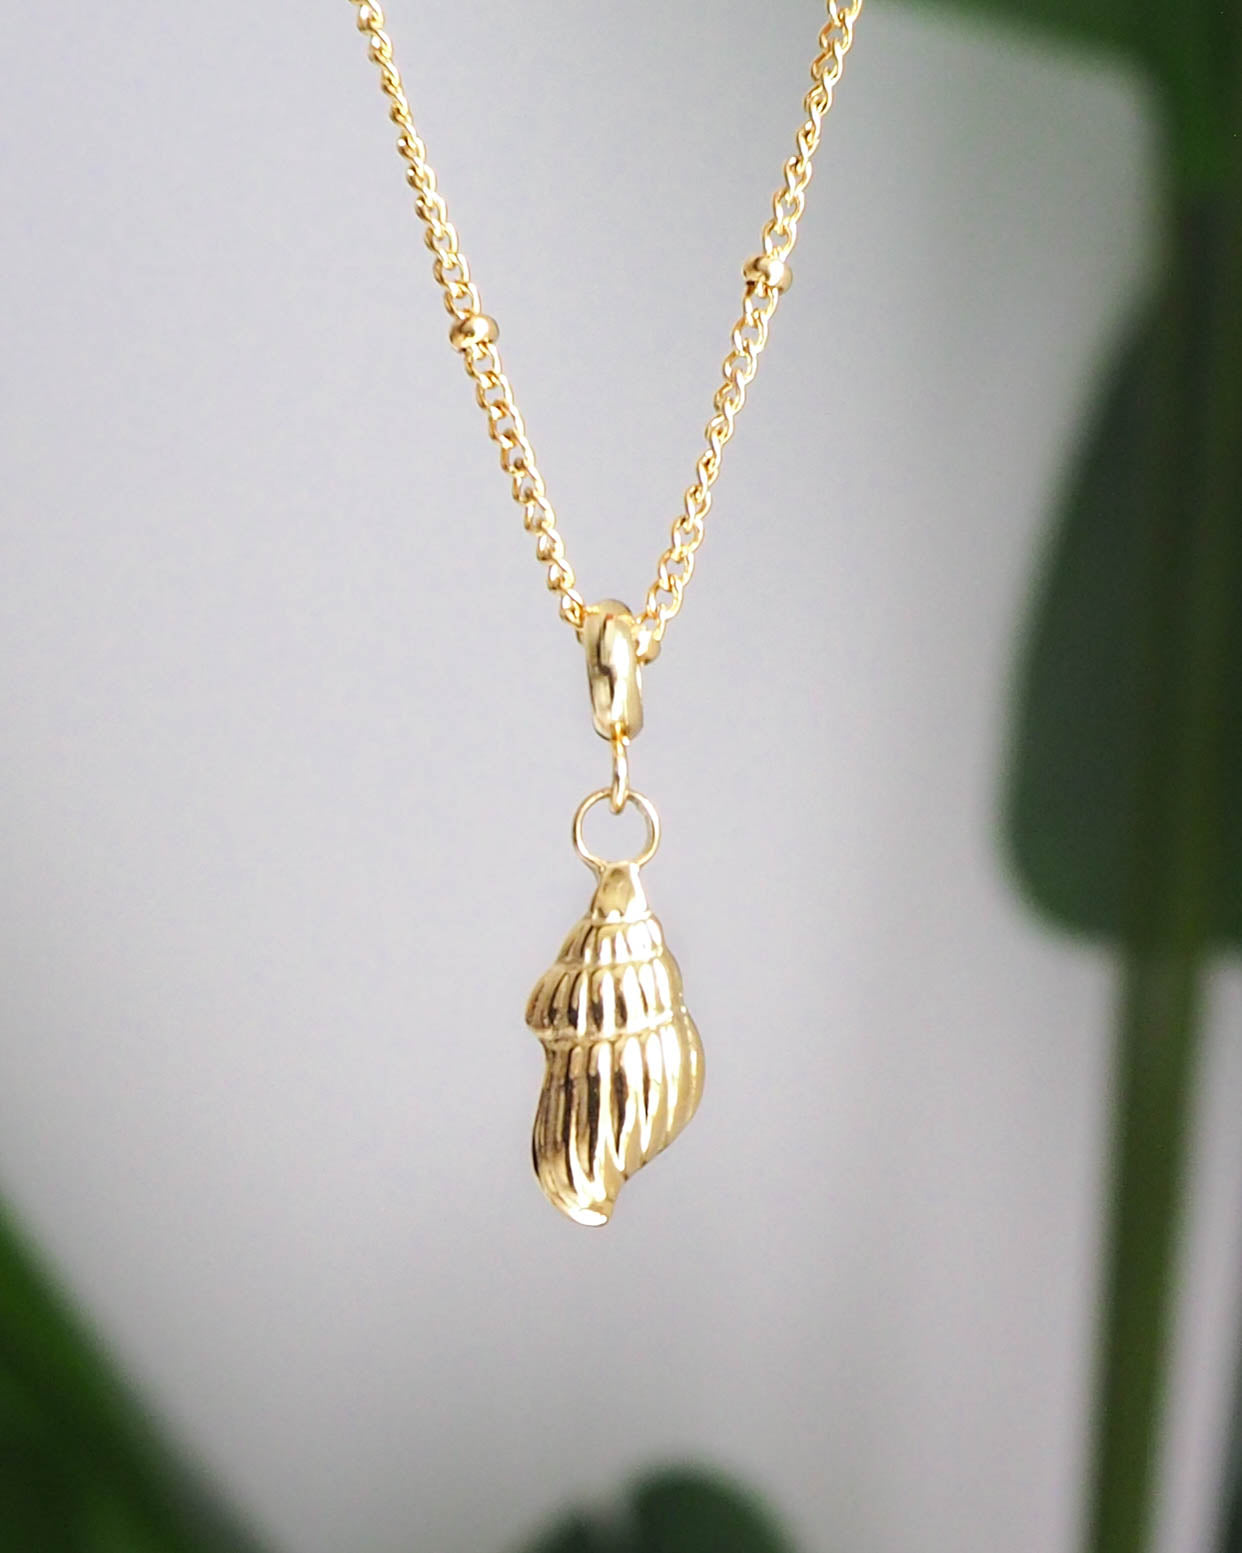 Necklace with Conch Shell Pendant Gold Stainless Steel